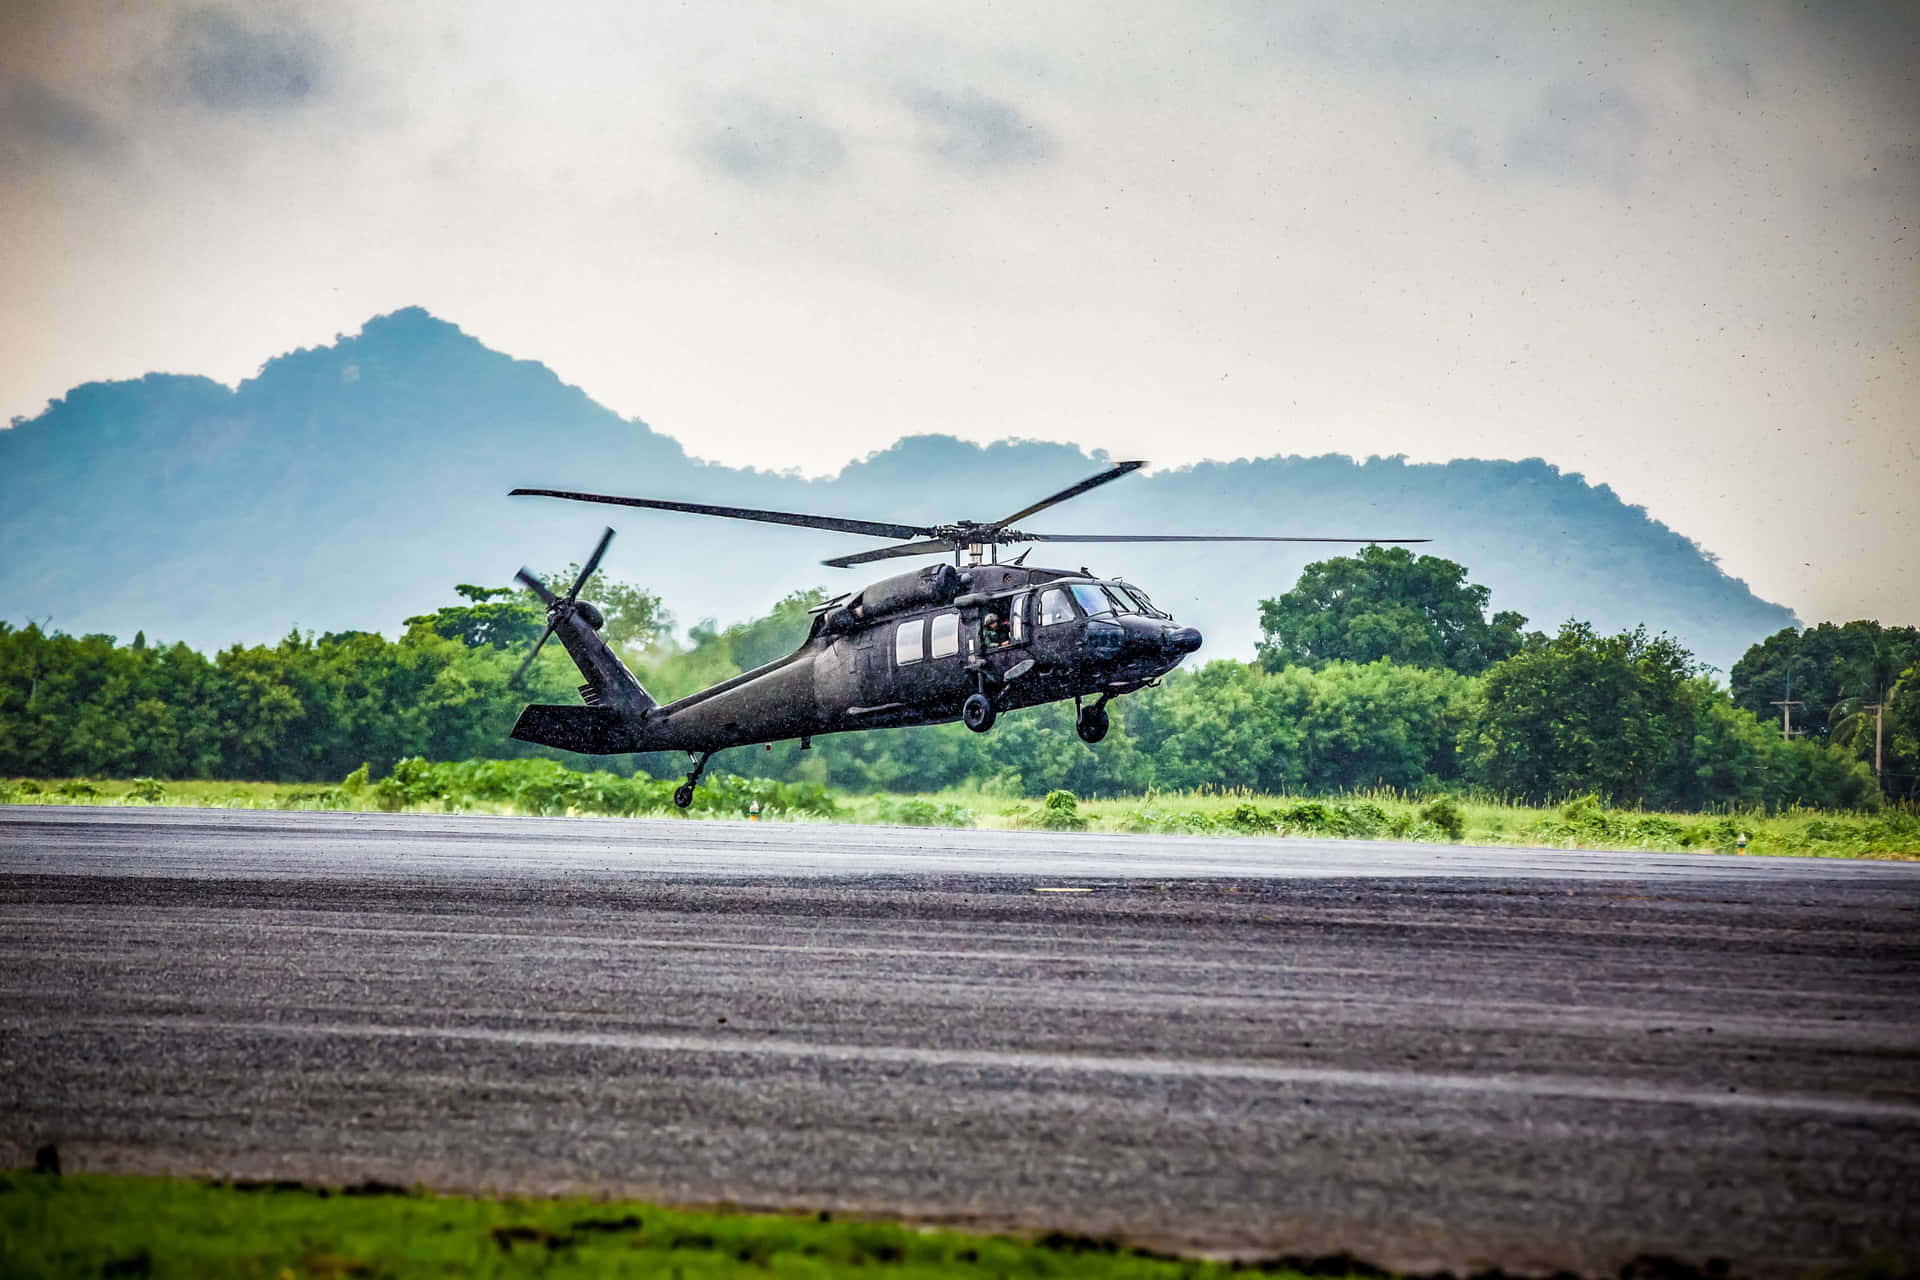 A Black Helicopter Is Taking Off From An Airport Runway